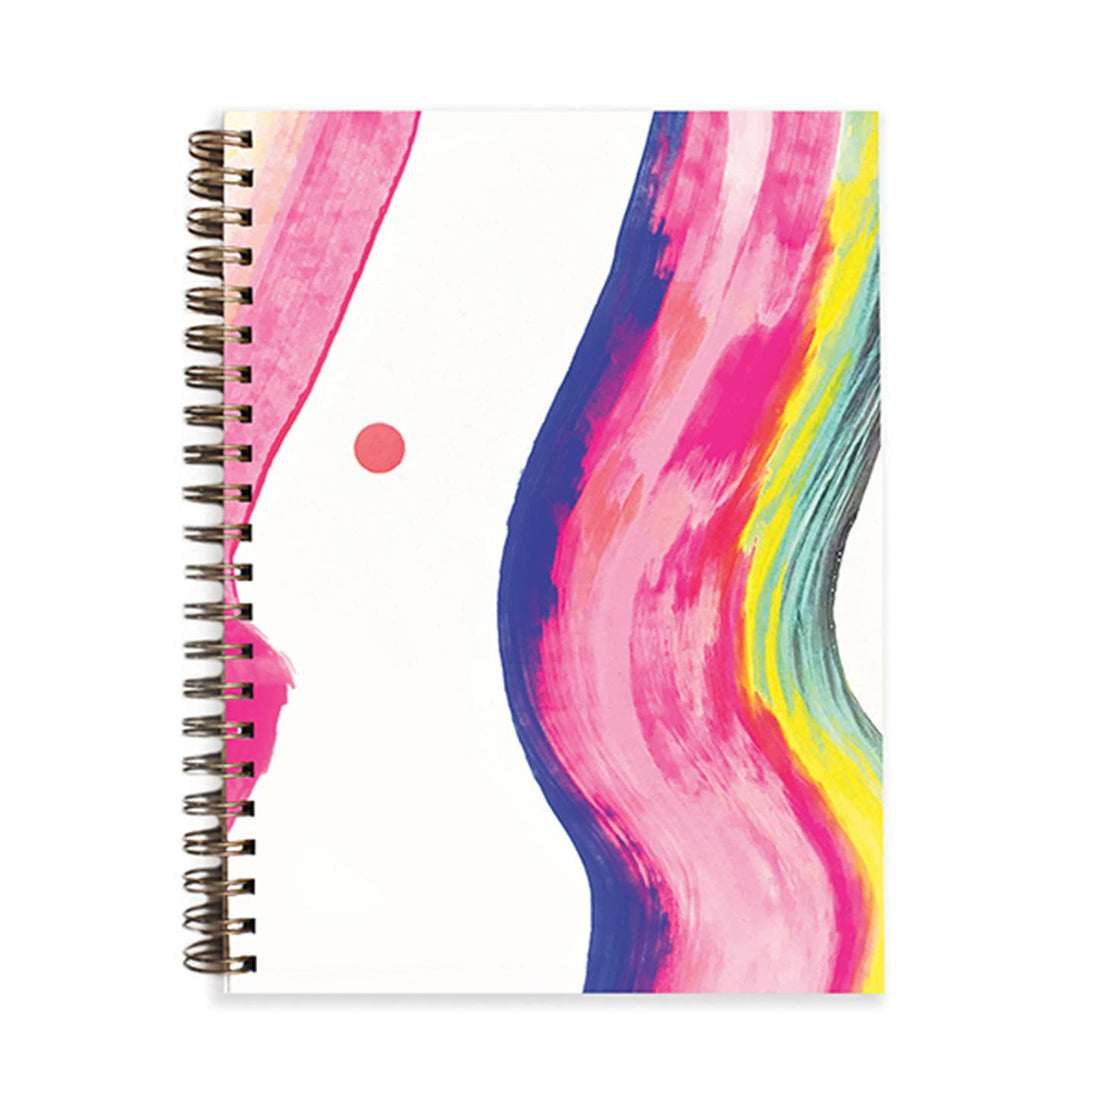 Painted Journal - Candy Swirl